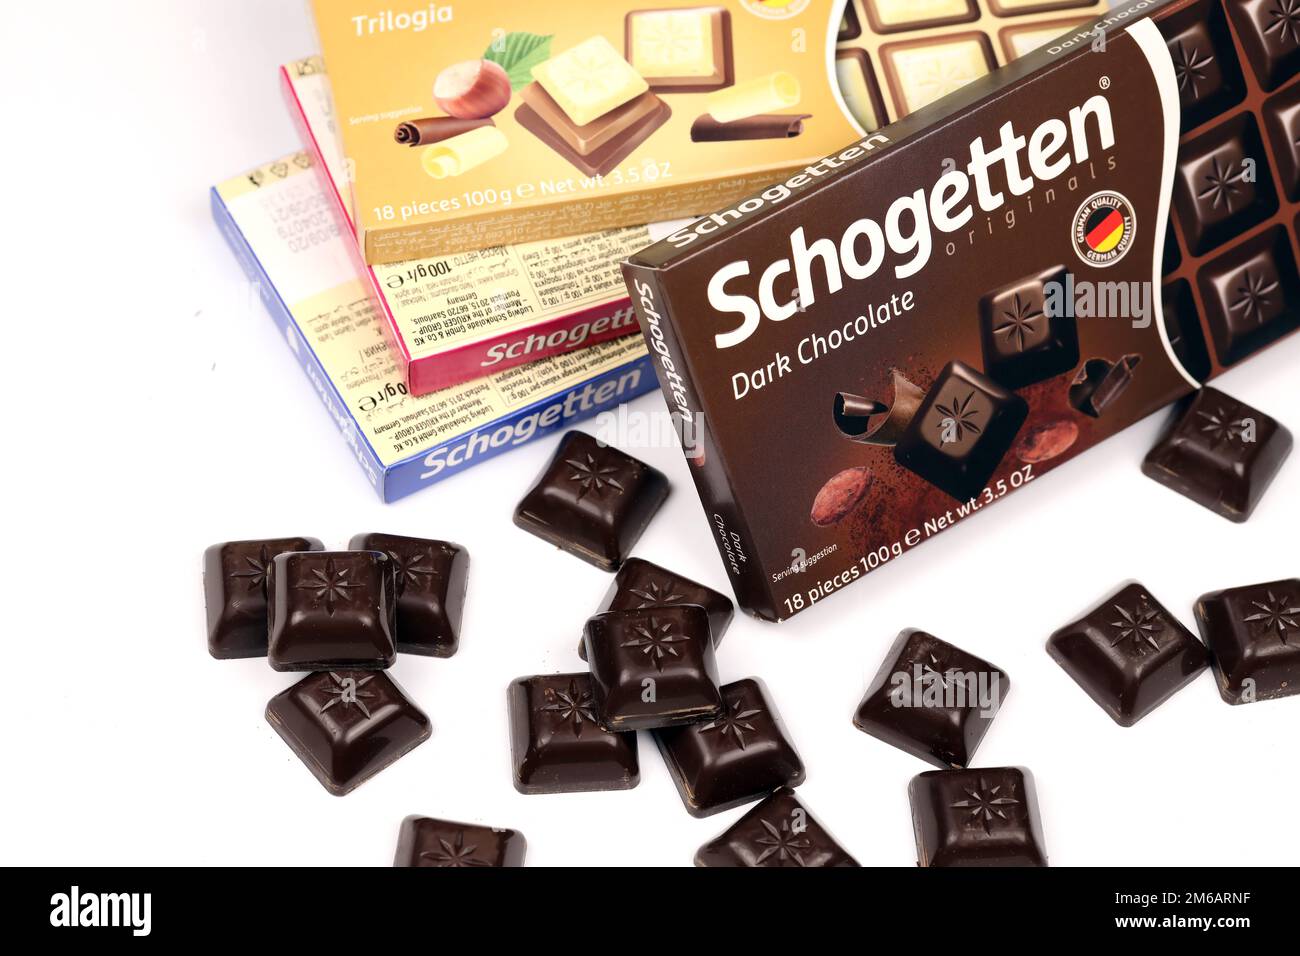 KYIV, UKRAINE - MAY Chocolate goods GmbH chocolate. by 2022 suppliers KG Europes produced 4, Photo successful Stock Alamy of one and confectionery Co. - Ludwig Schogetten Schokolade most